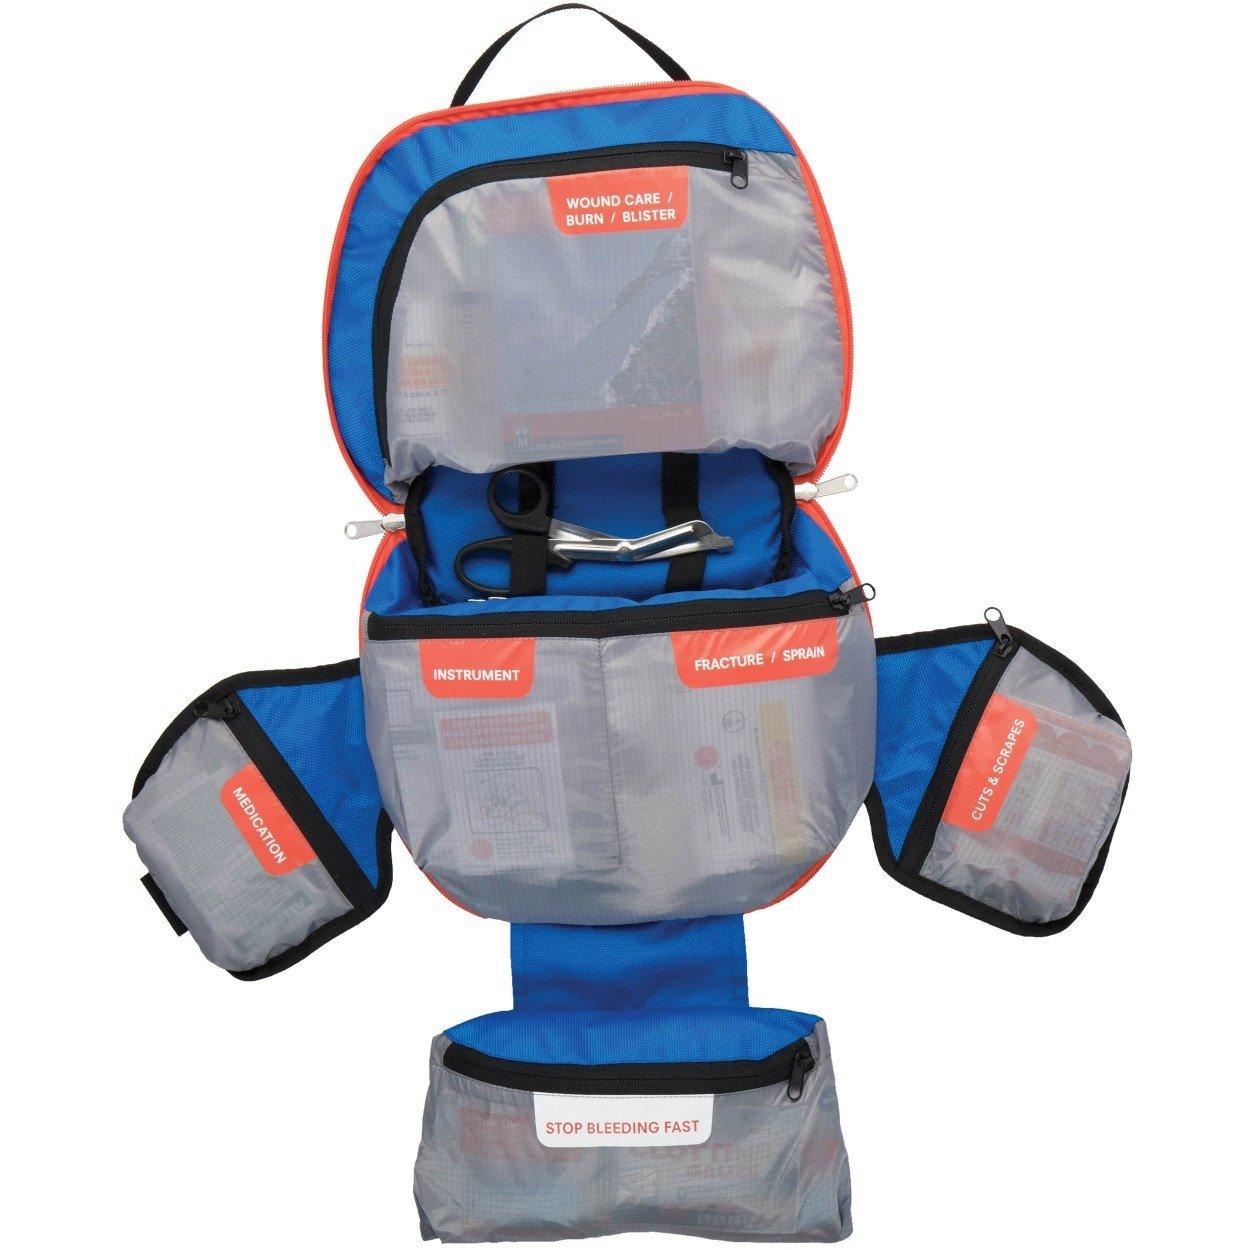 Mountain Series Guide First Aid Kit